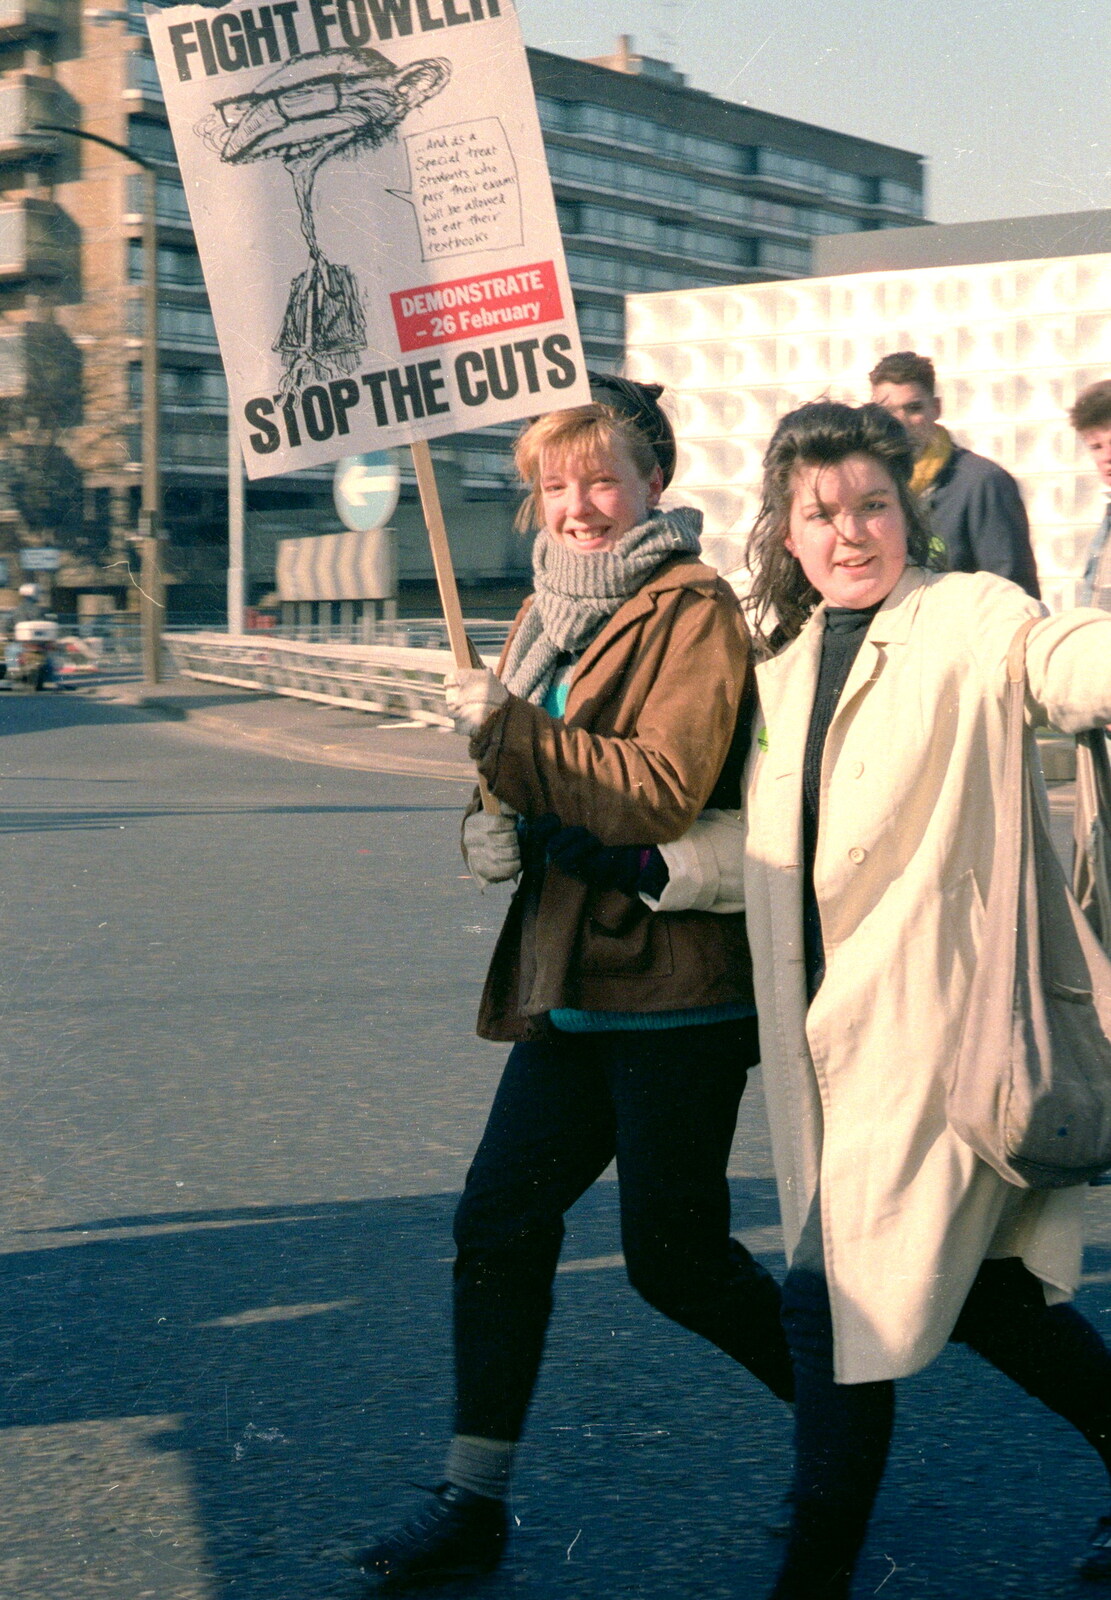 More 'Fight Fowler, Stop the Cuts' placards from Uni: No Chance Fowler! A student Demonstration, London - 26th February 1986